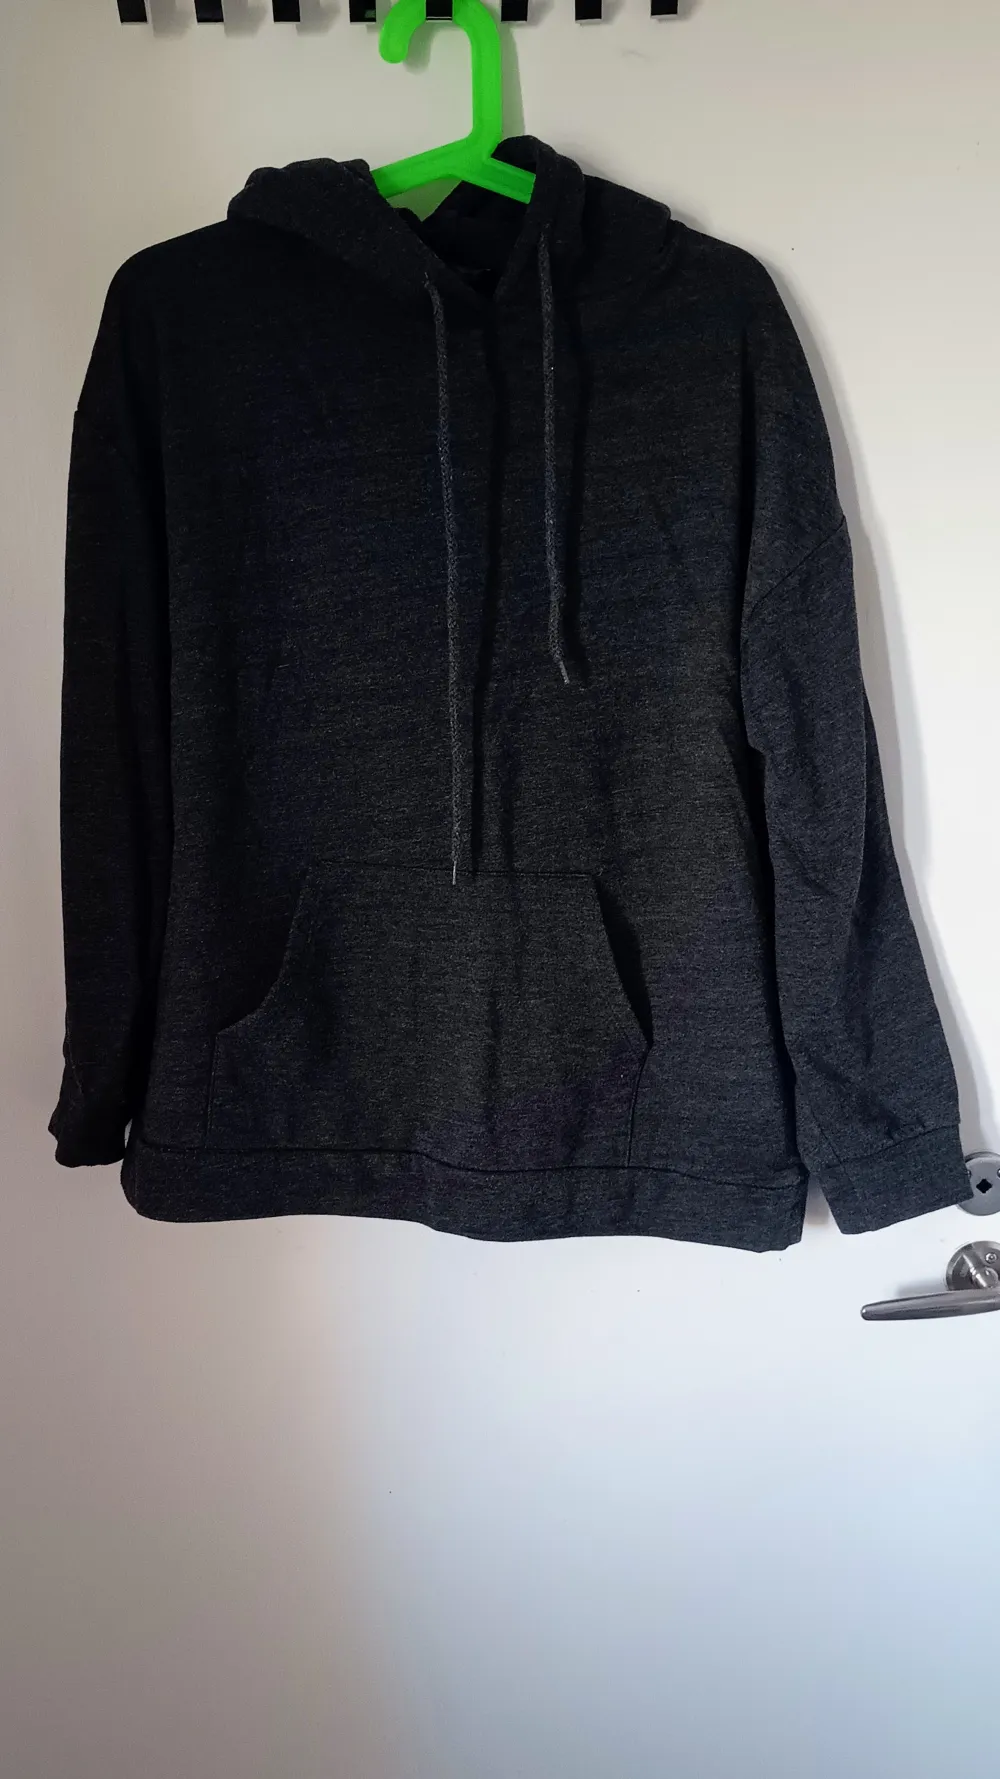 Worn a few times. Oversized and can fit size L. Hoodies.